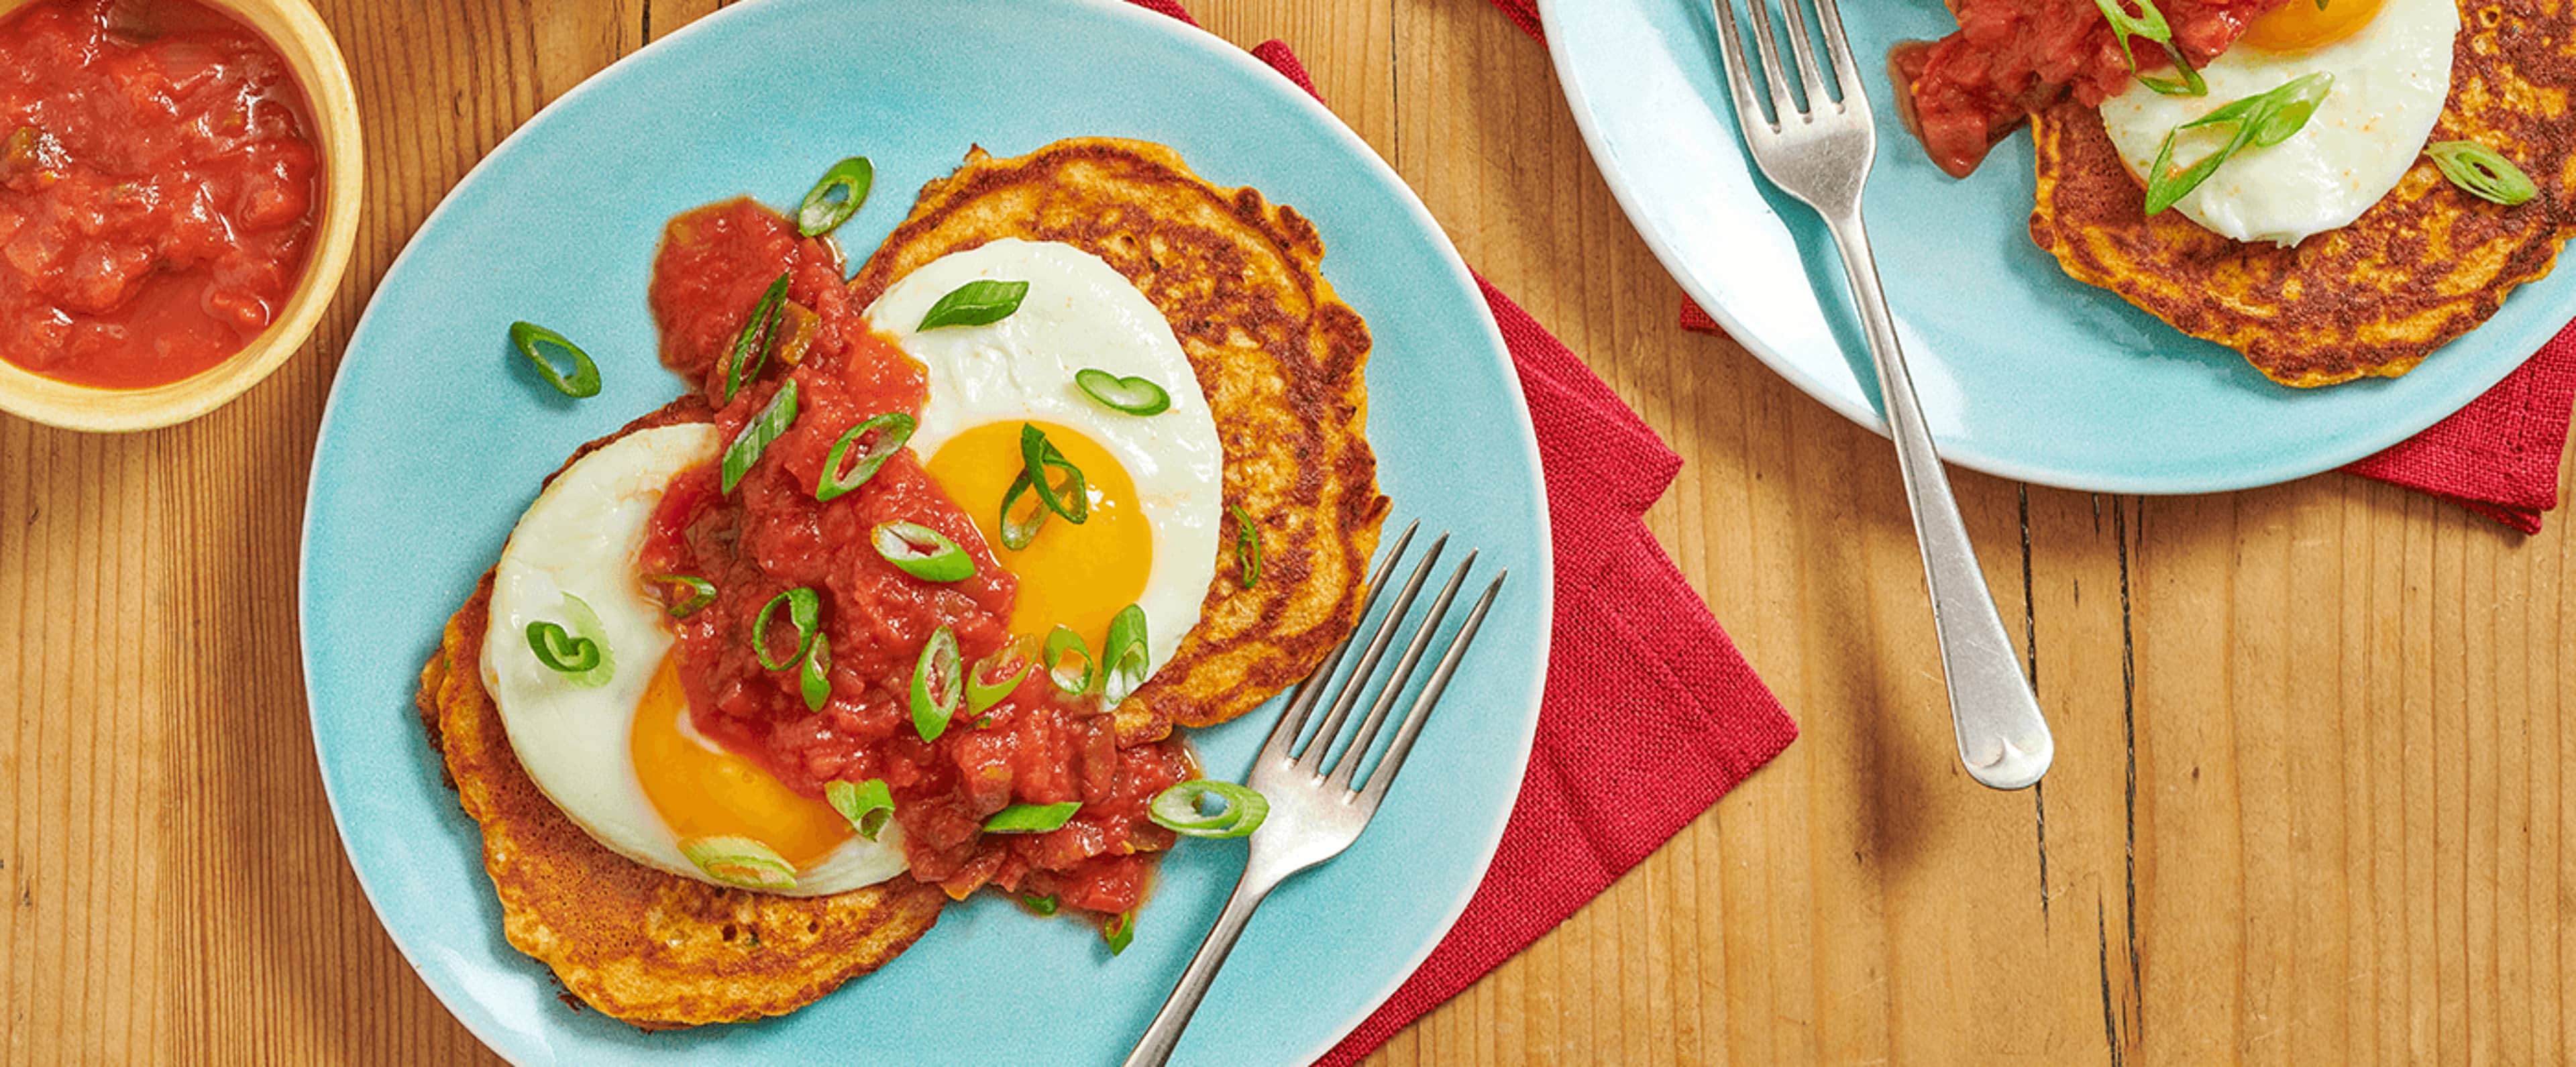 sping onion corn pancakes with fried eggs mexican meal